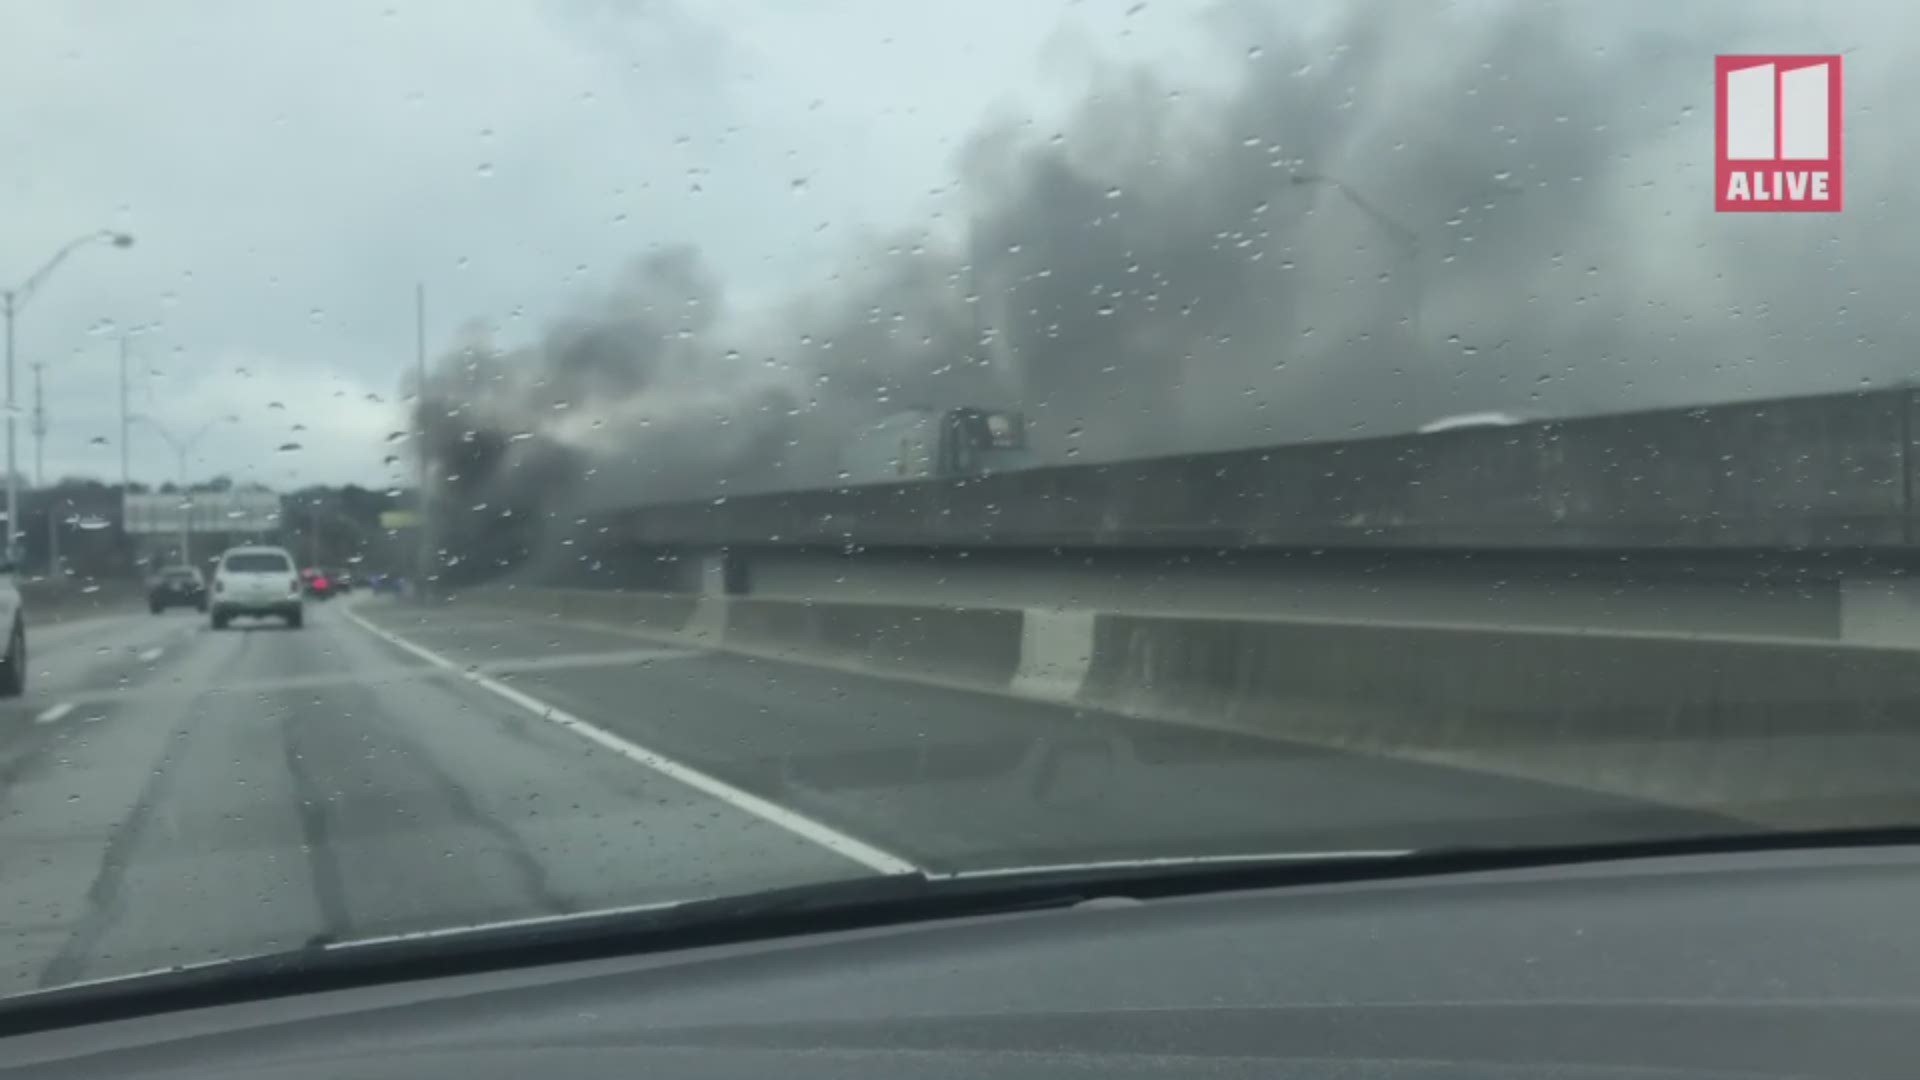 Buford Highway at I-85 is closed as crews put out a fire under the bridge.